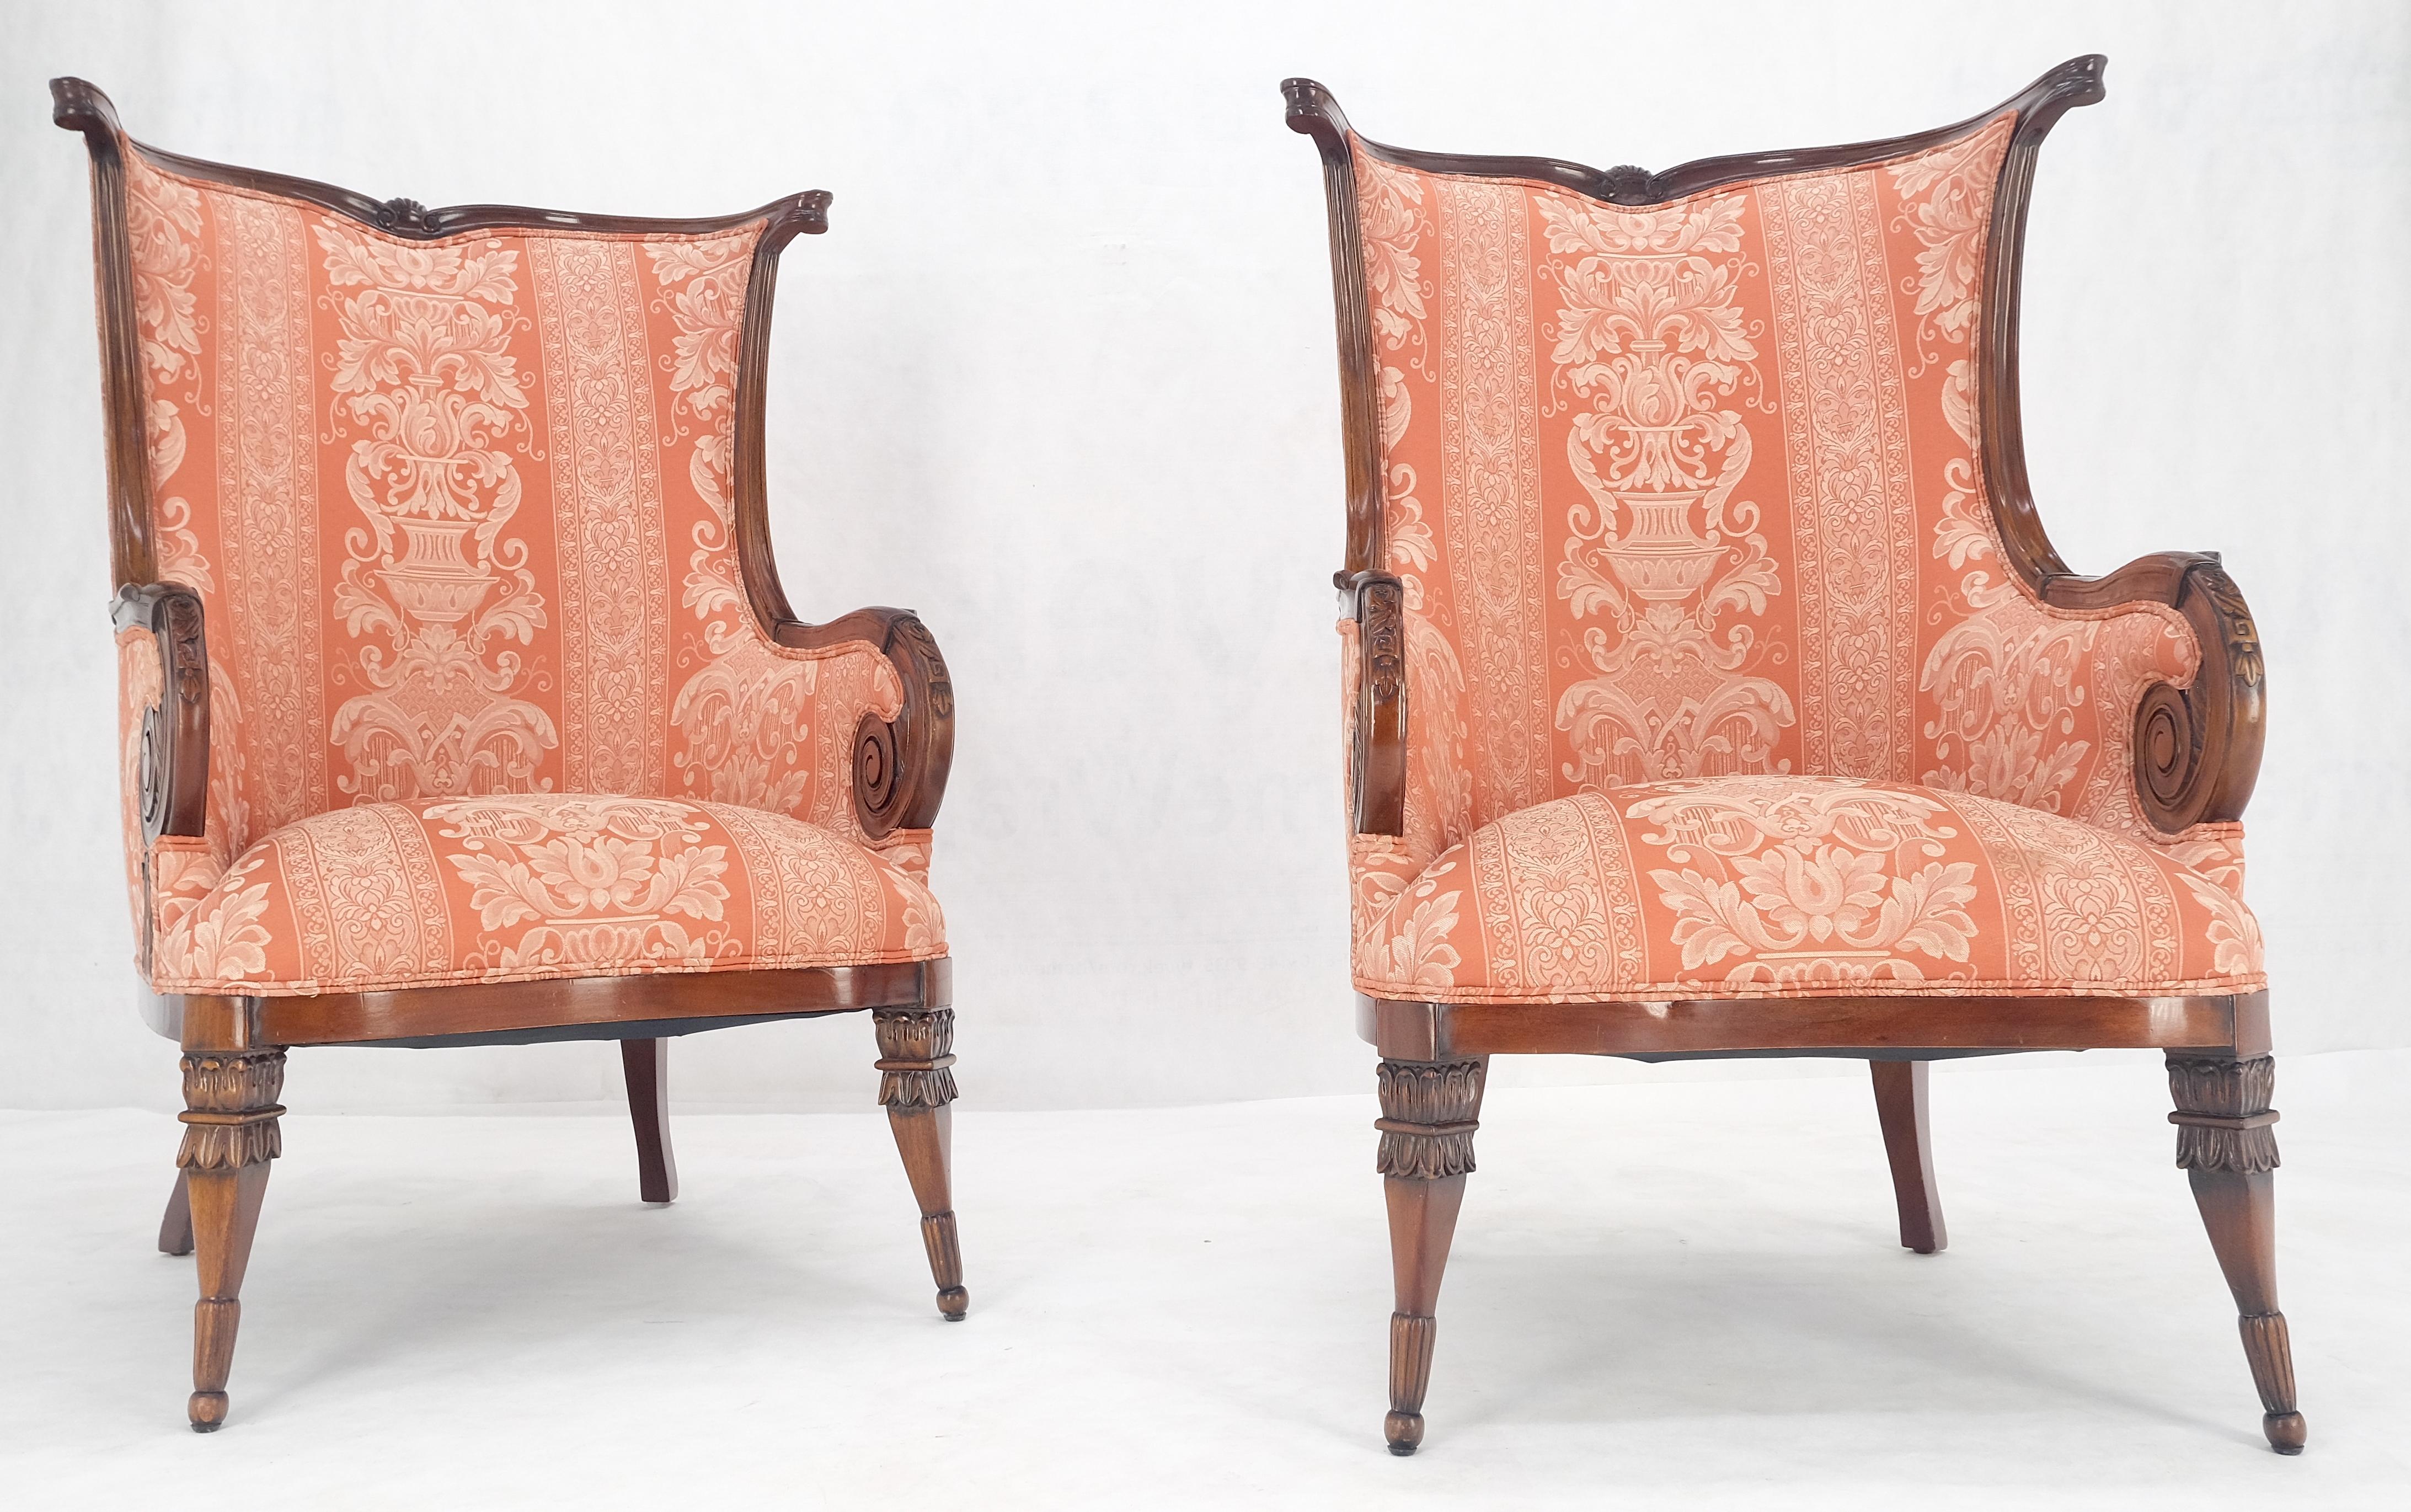 Pair of Fine Carved Mahogany Cream Silk Like Upholstery Regency Fire Side Chairs For Sale 2